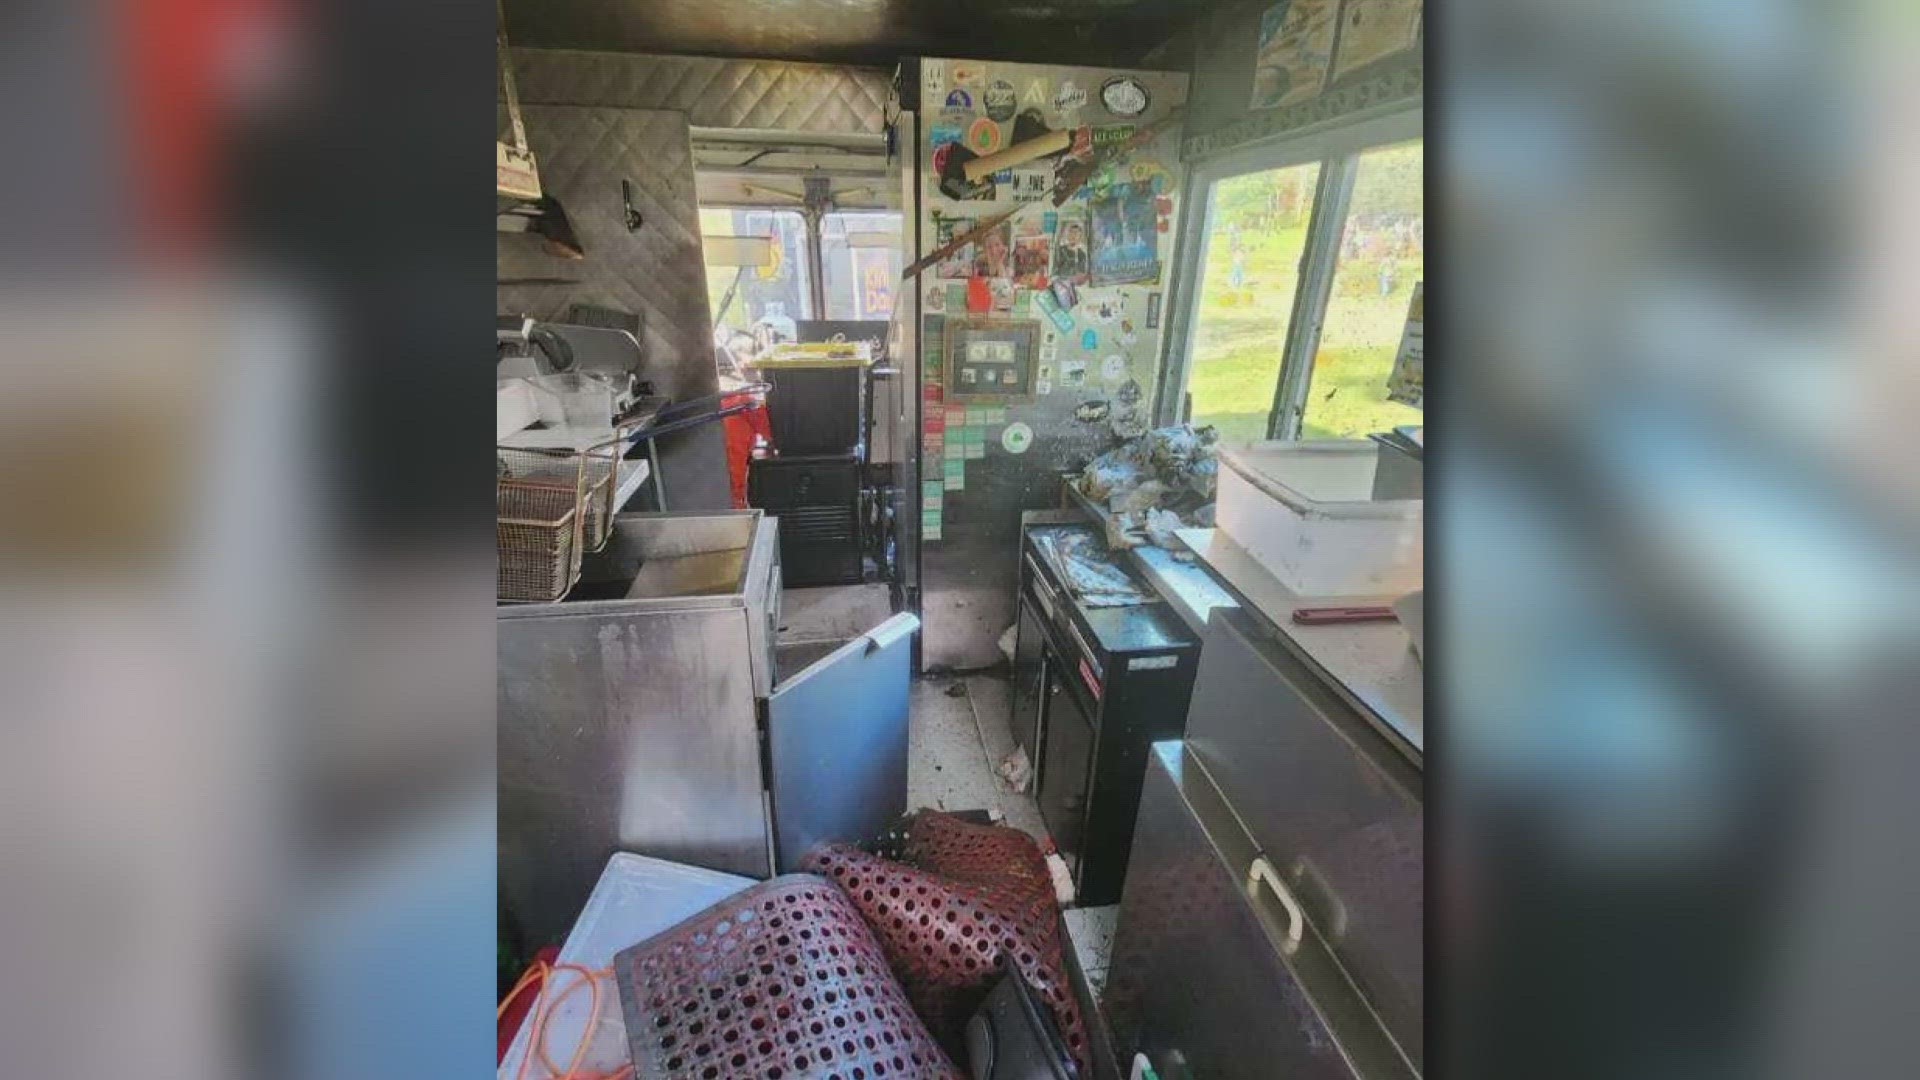 Timmy Elliot and Oliver Borelli were injured when the food truck they were working in caught fire over the weekend. Several fundraisers have already been set up.